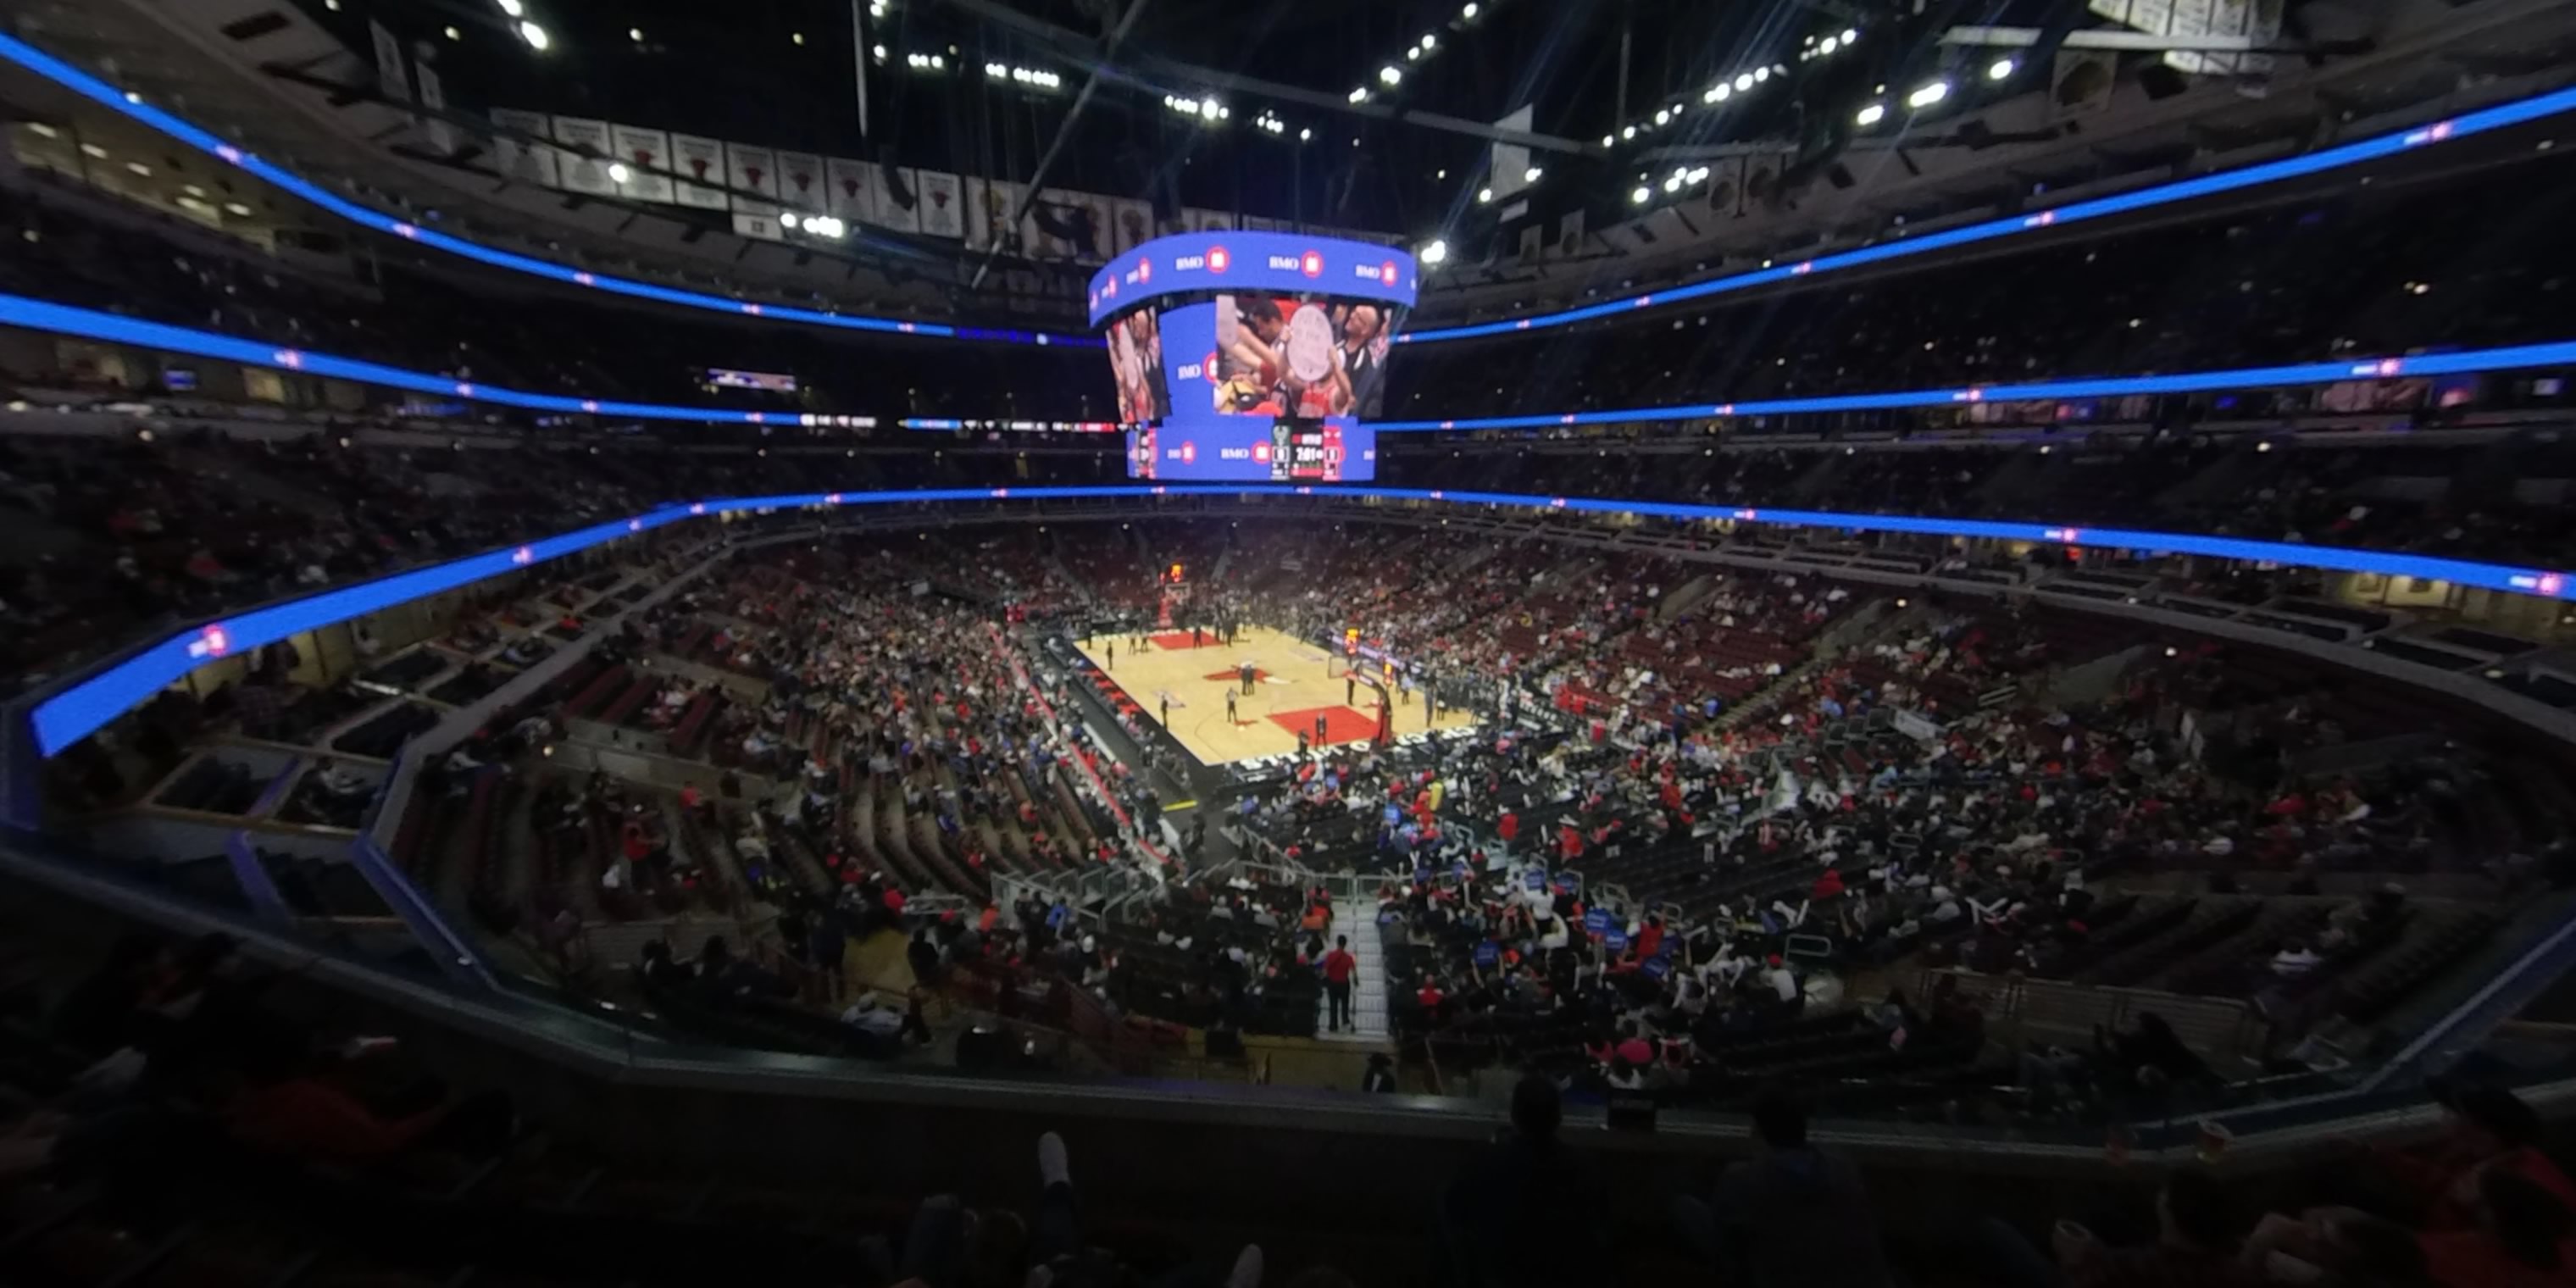 section 211 panoramic seat view  for basketball - united center